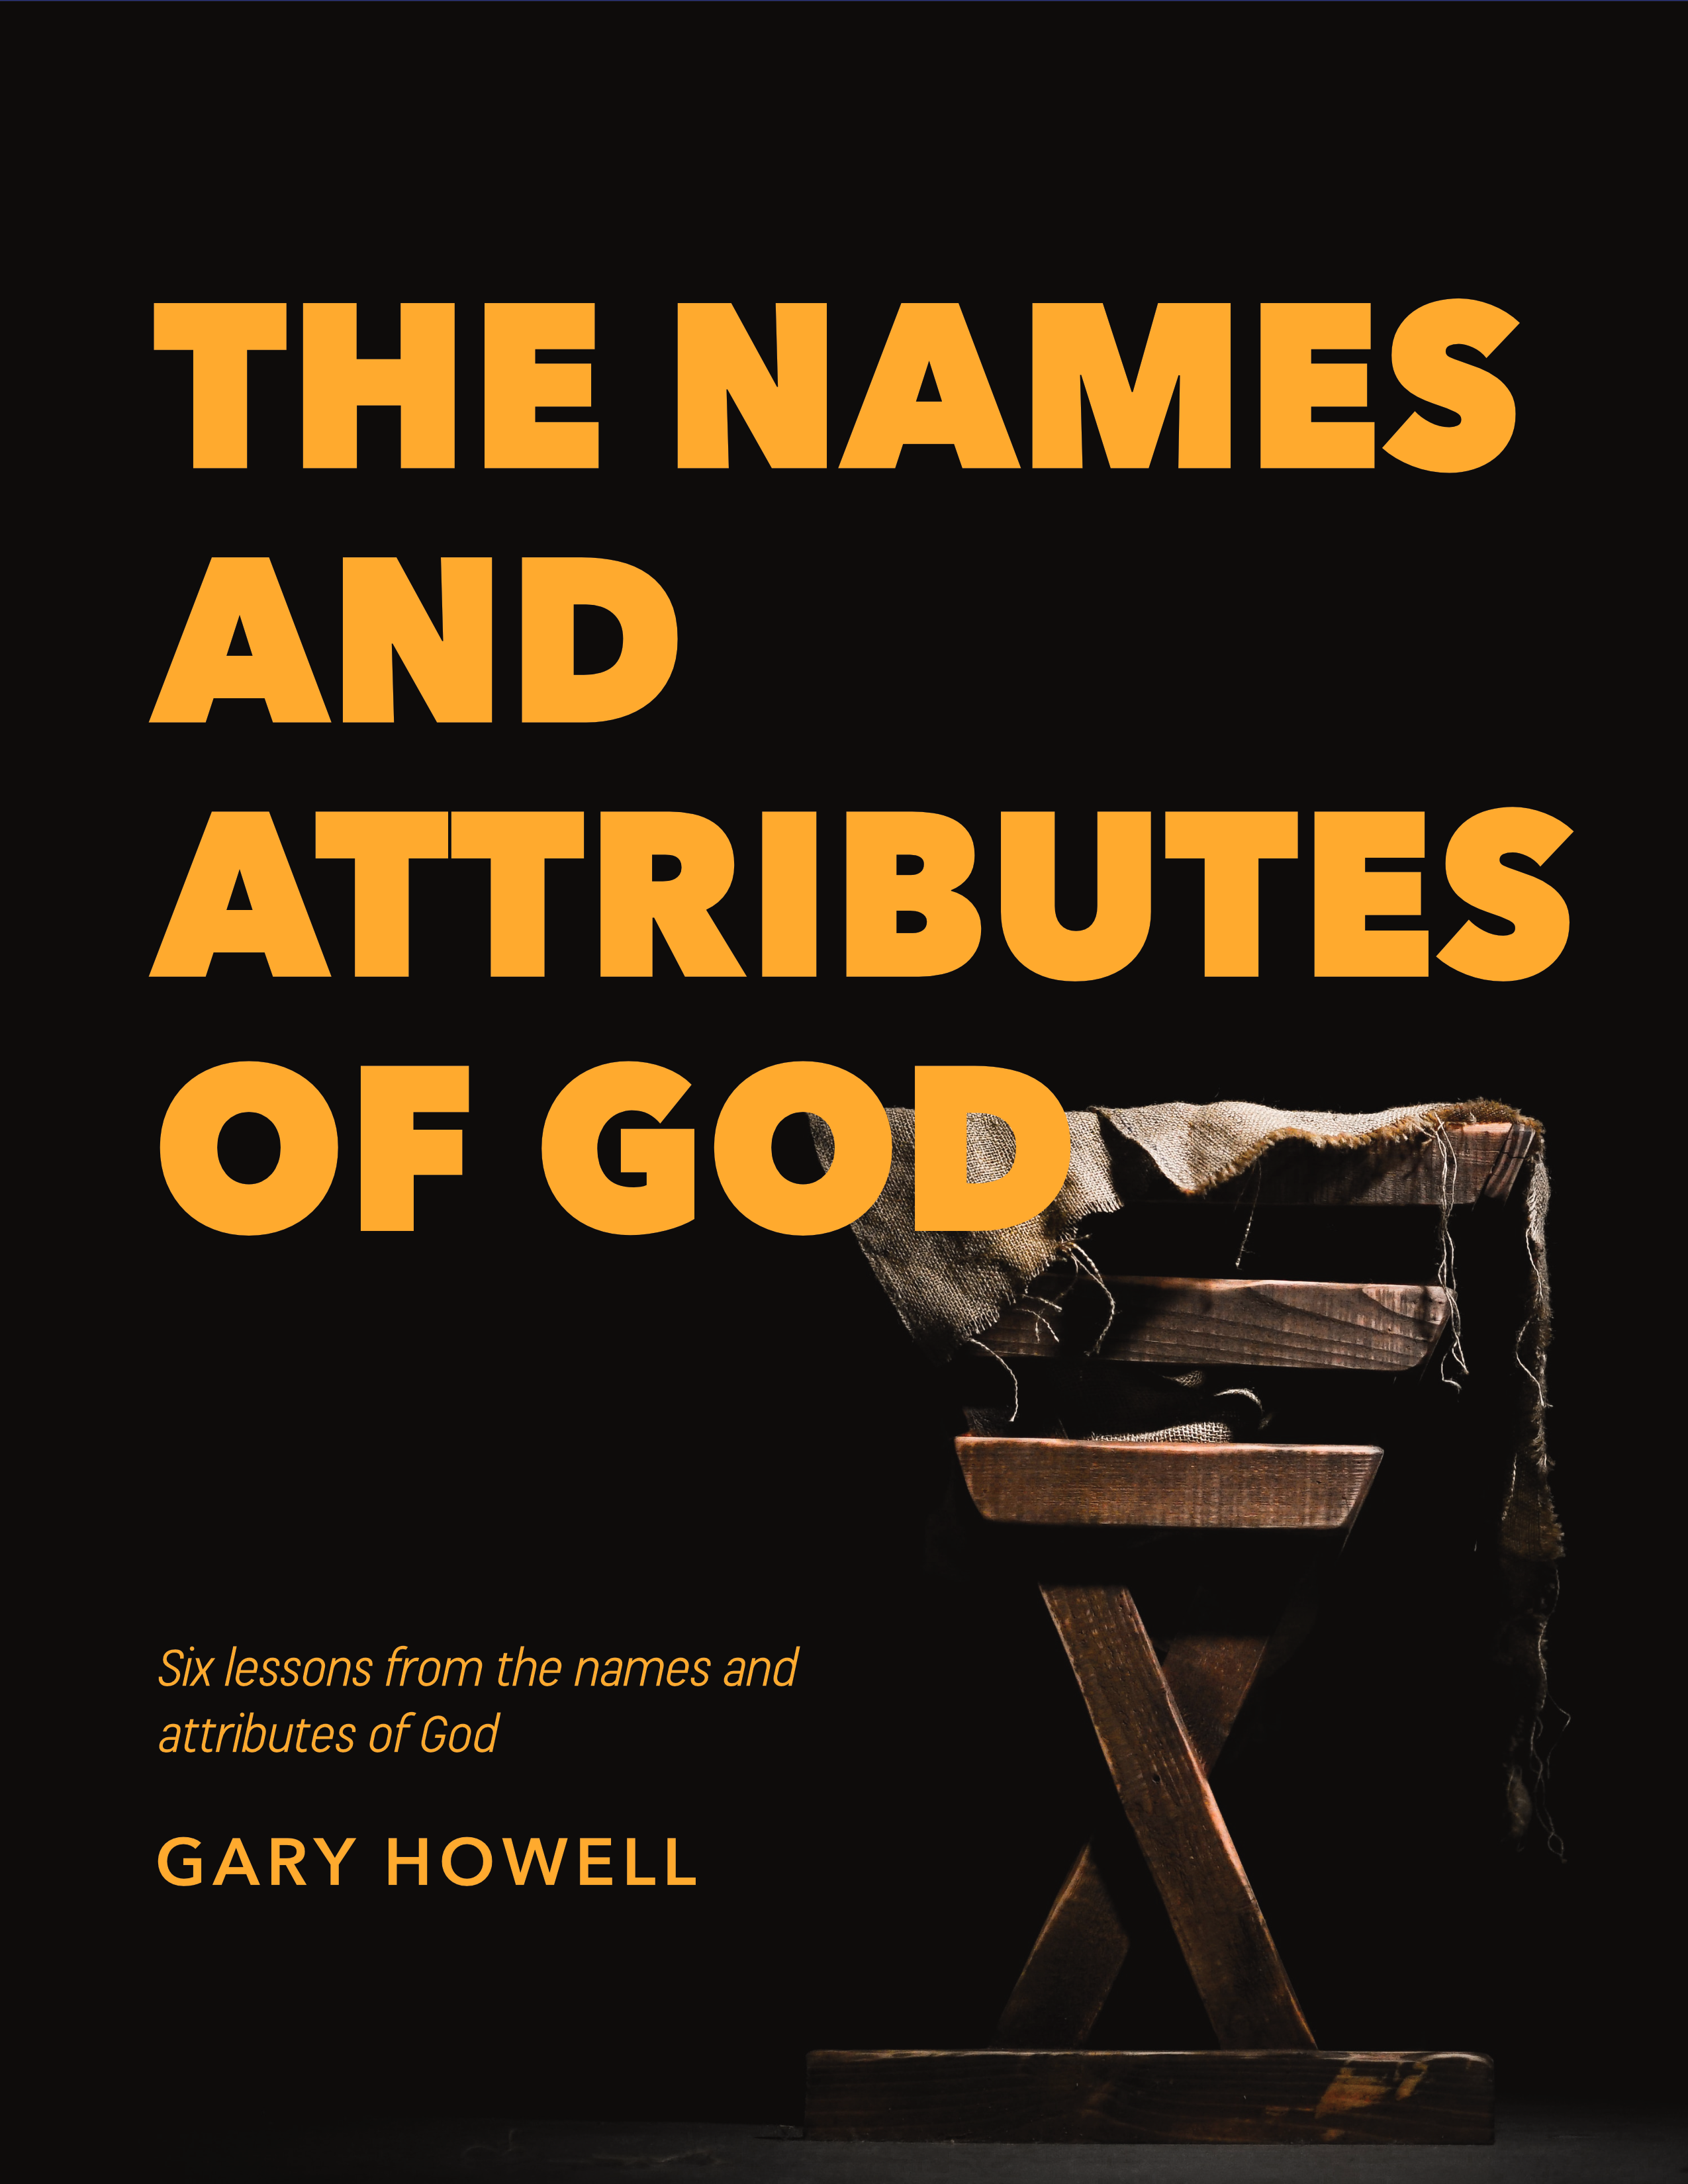 the names and attributes of God